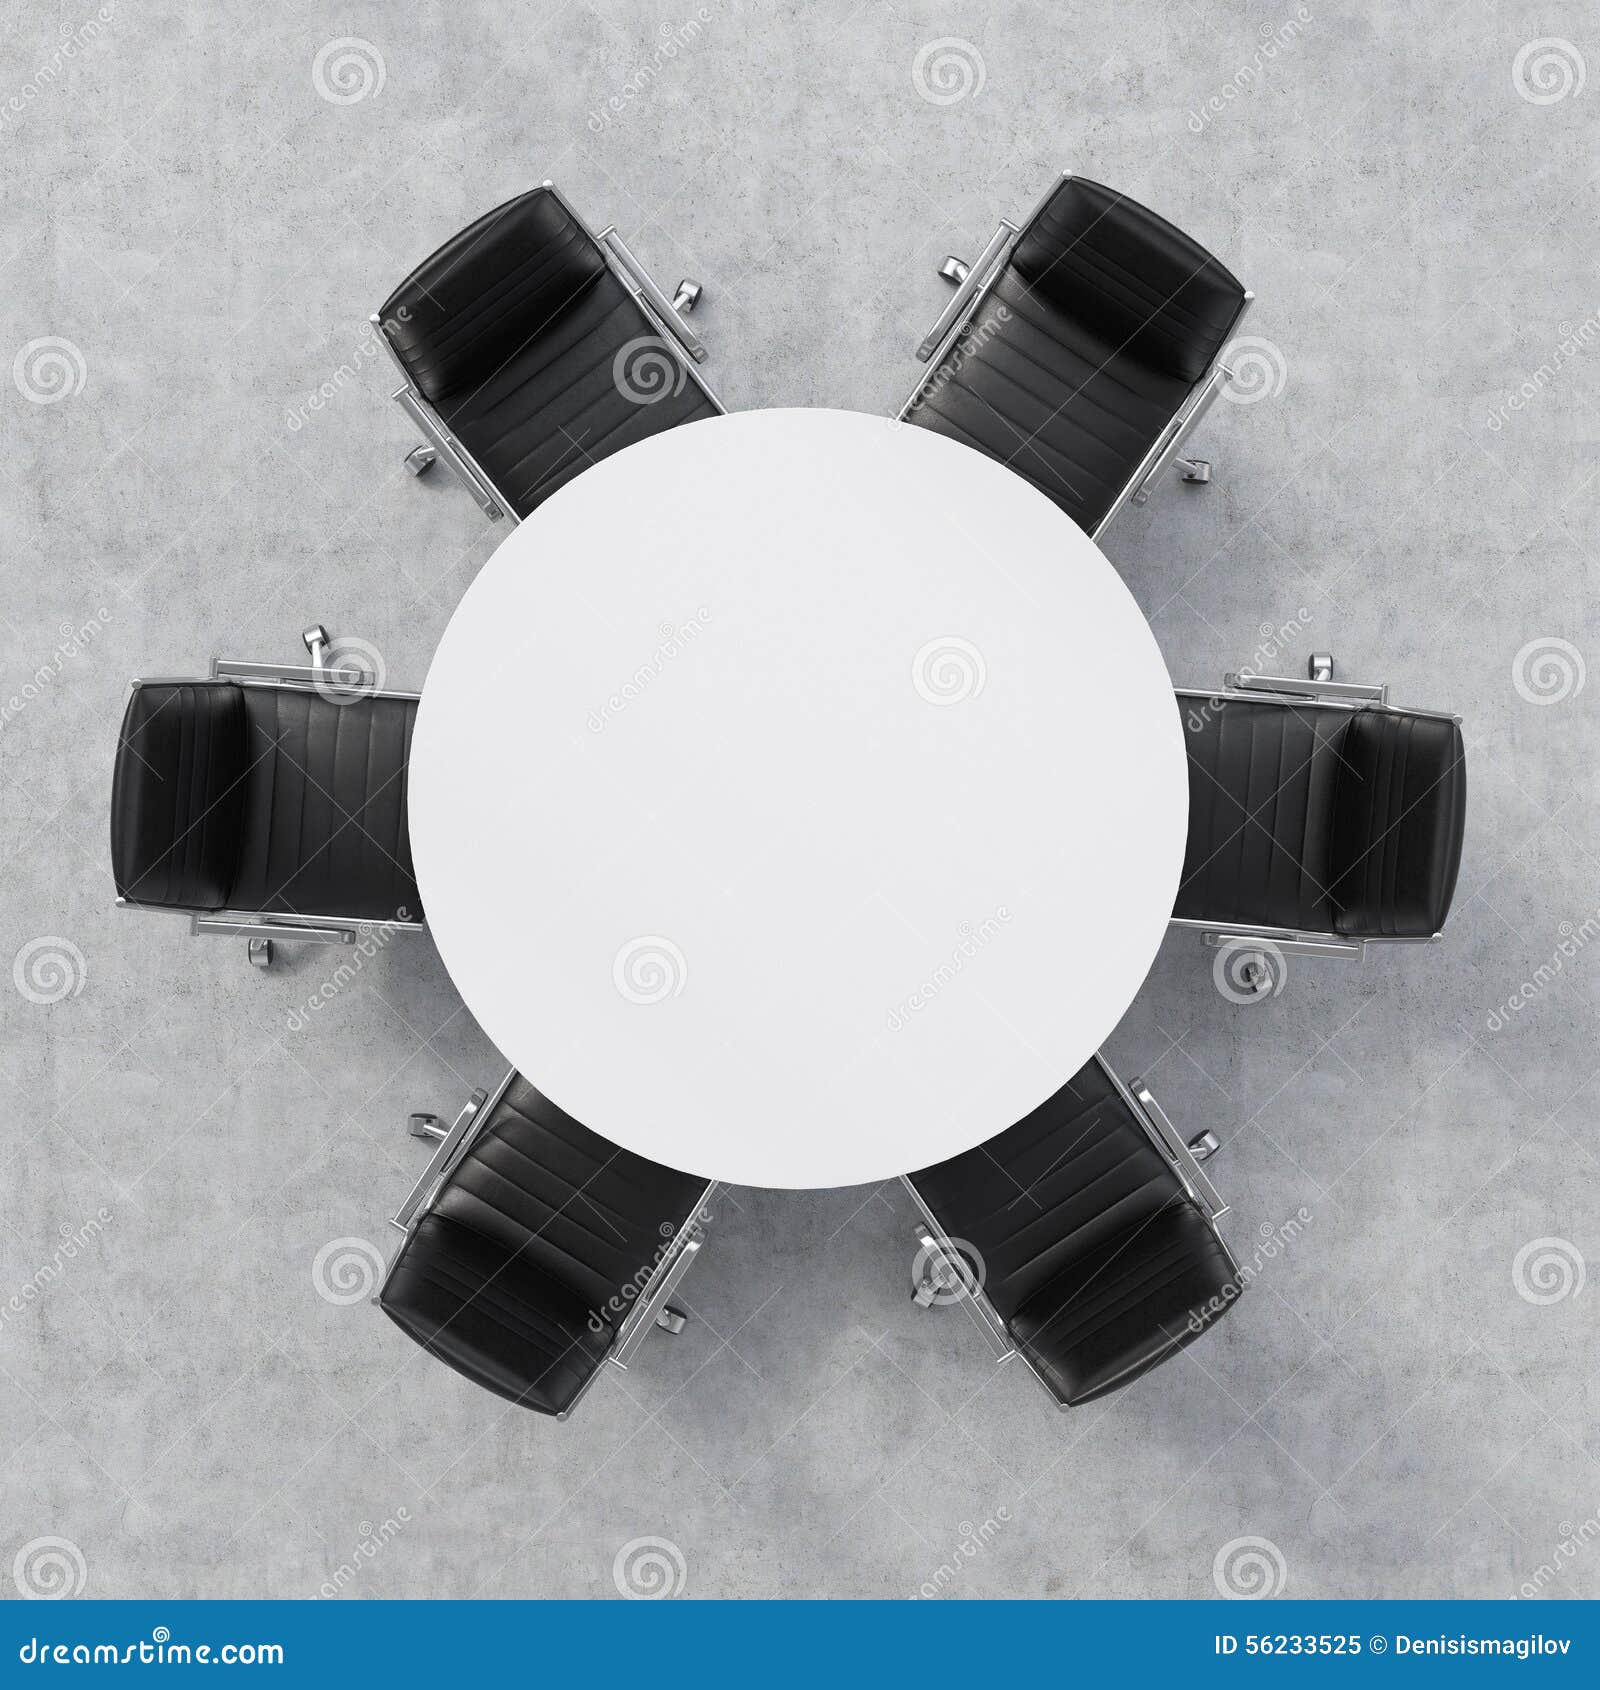 Top View Of A Conference Room A White Round Table And Six Chairs Around Office Interior 3d Rendering Stock Image Image Of Decor